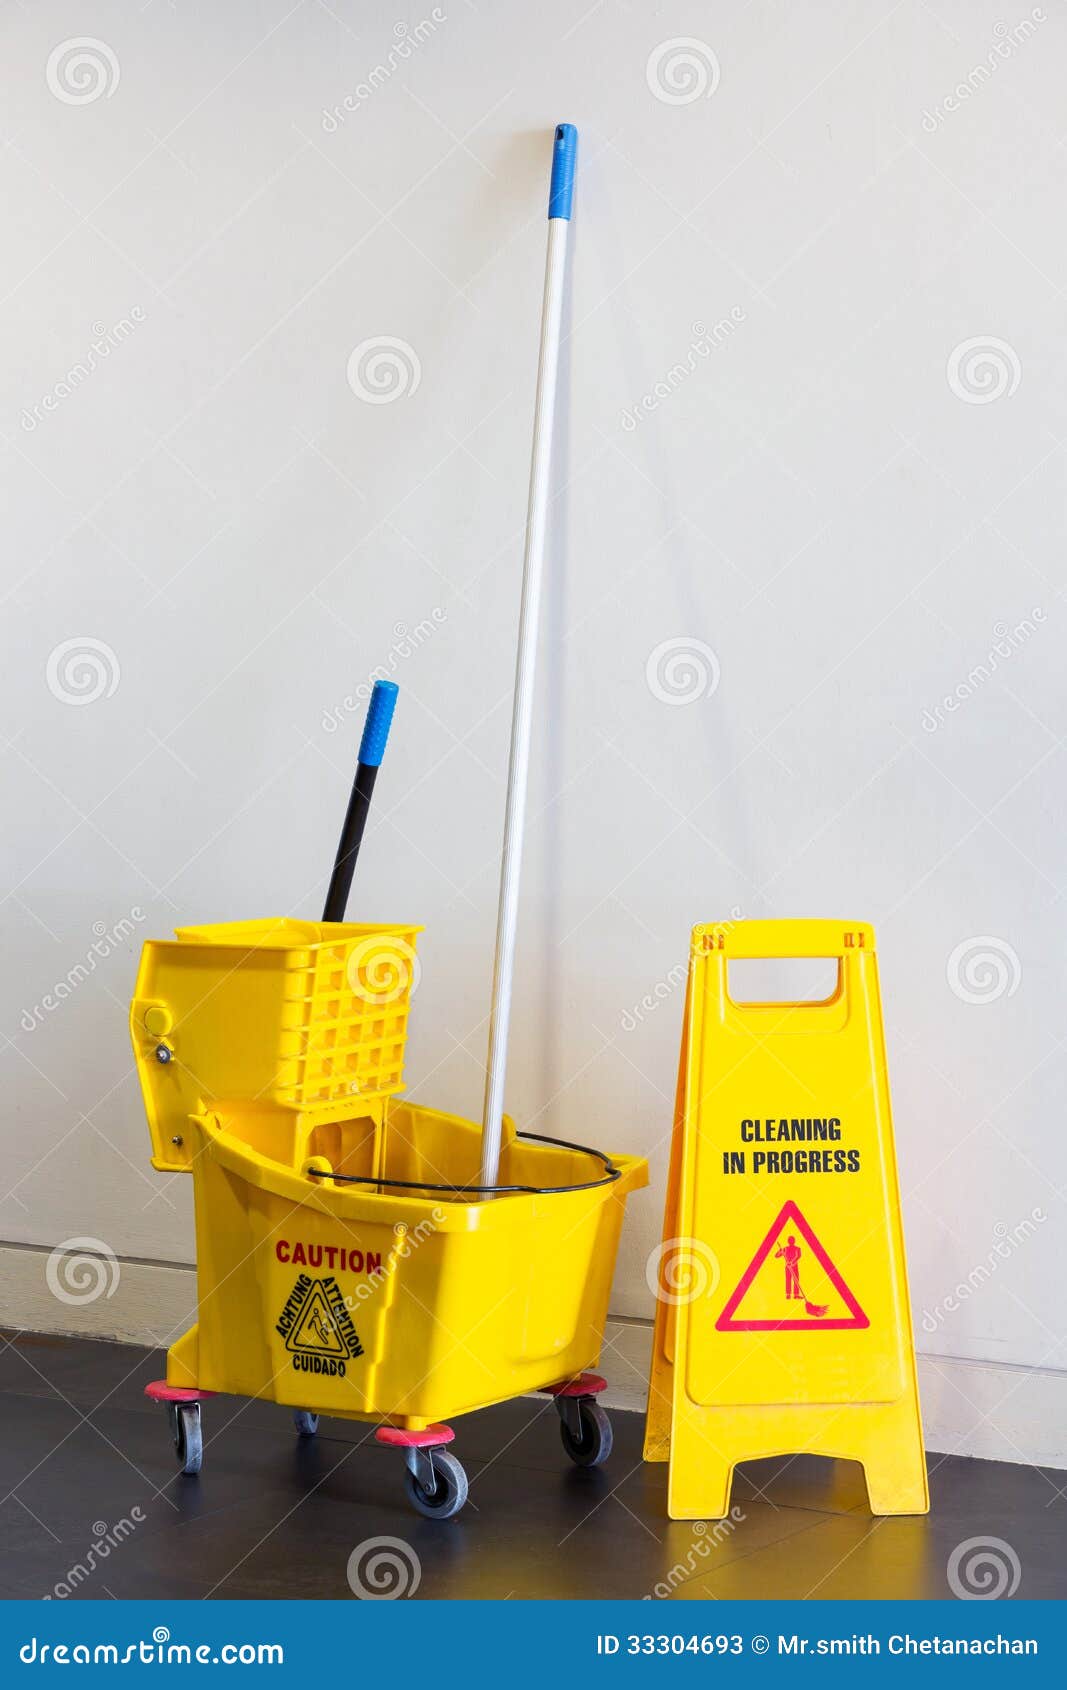 mop bucket and wringer